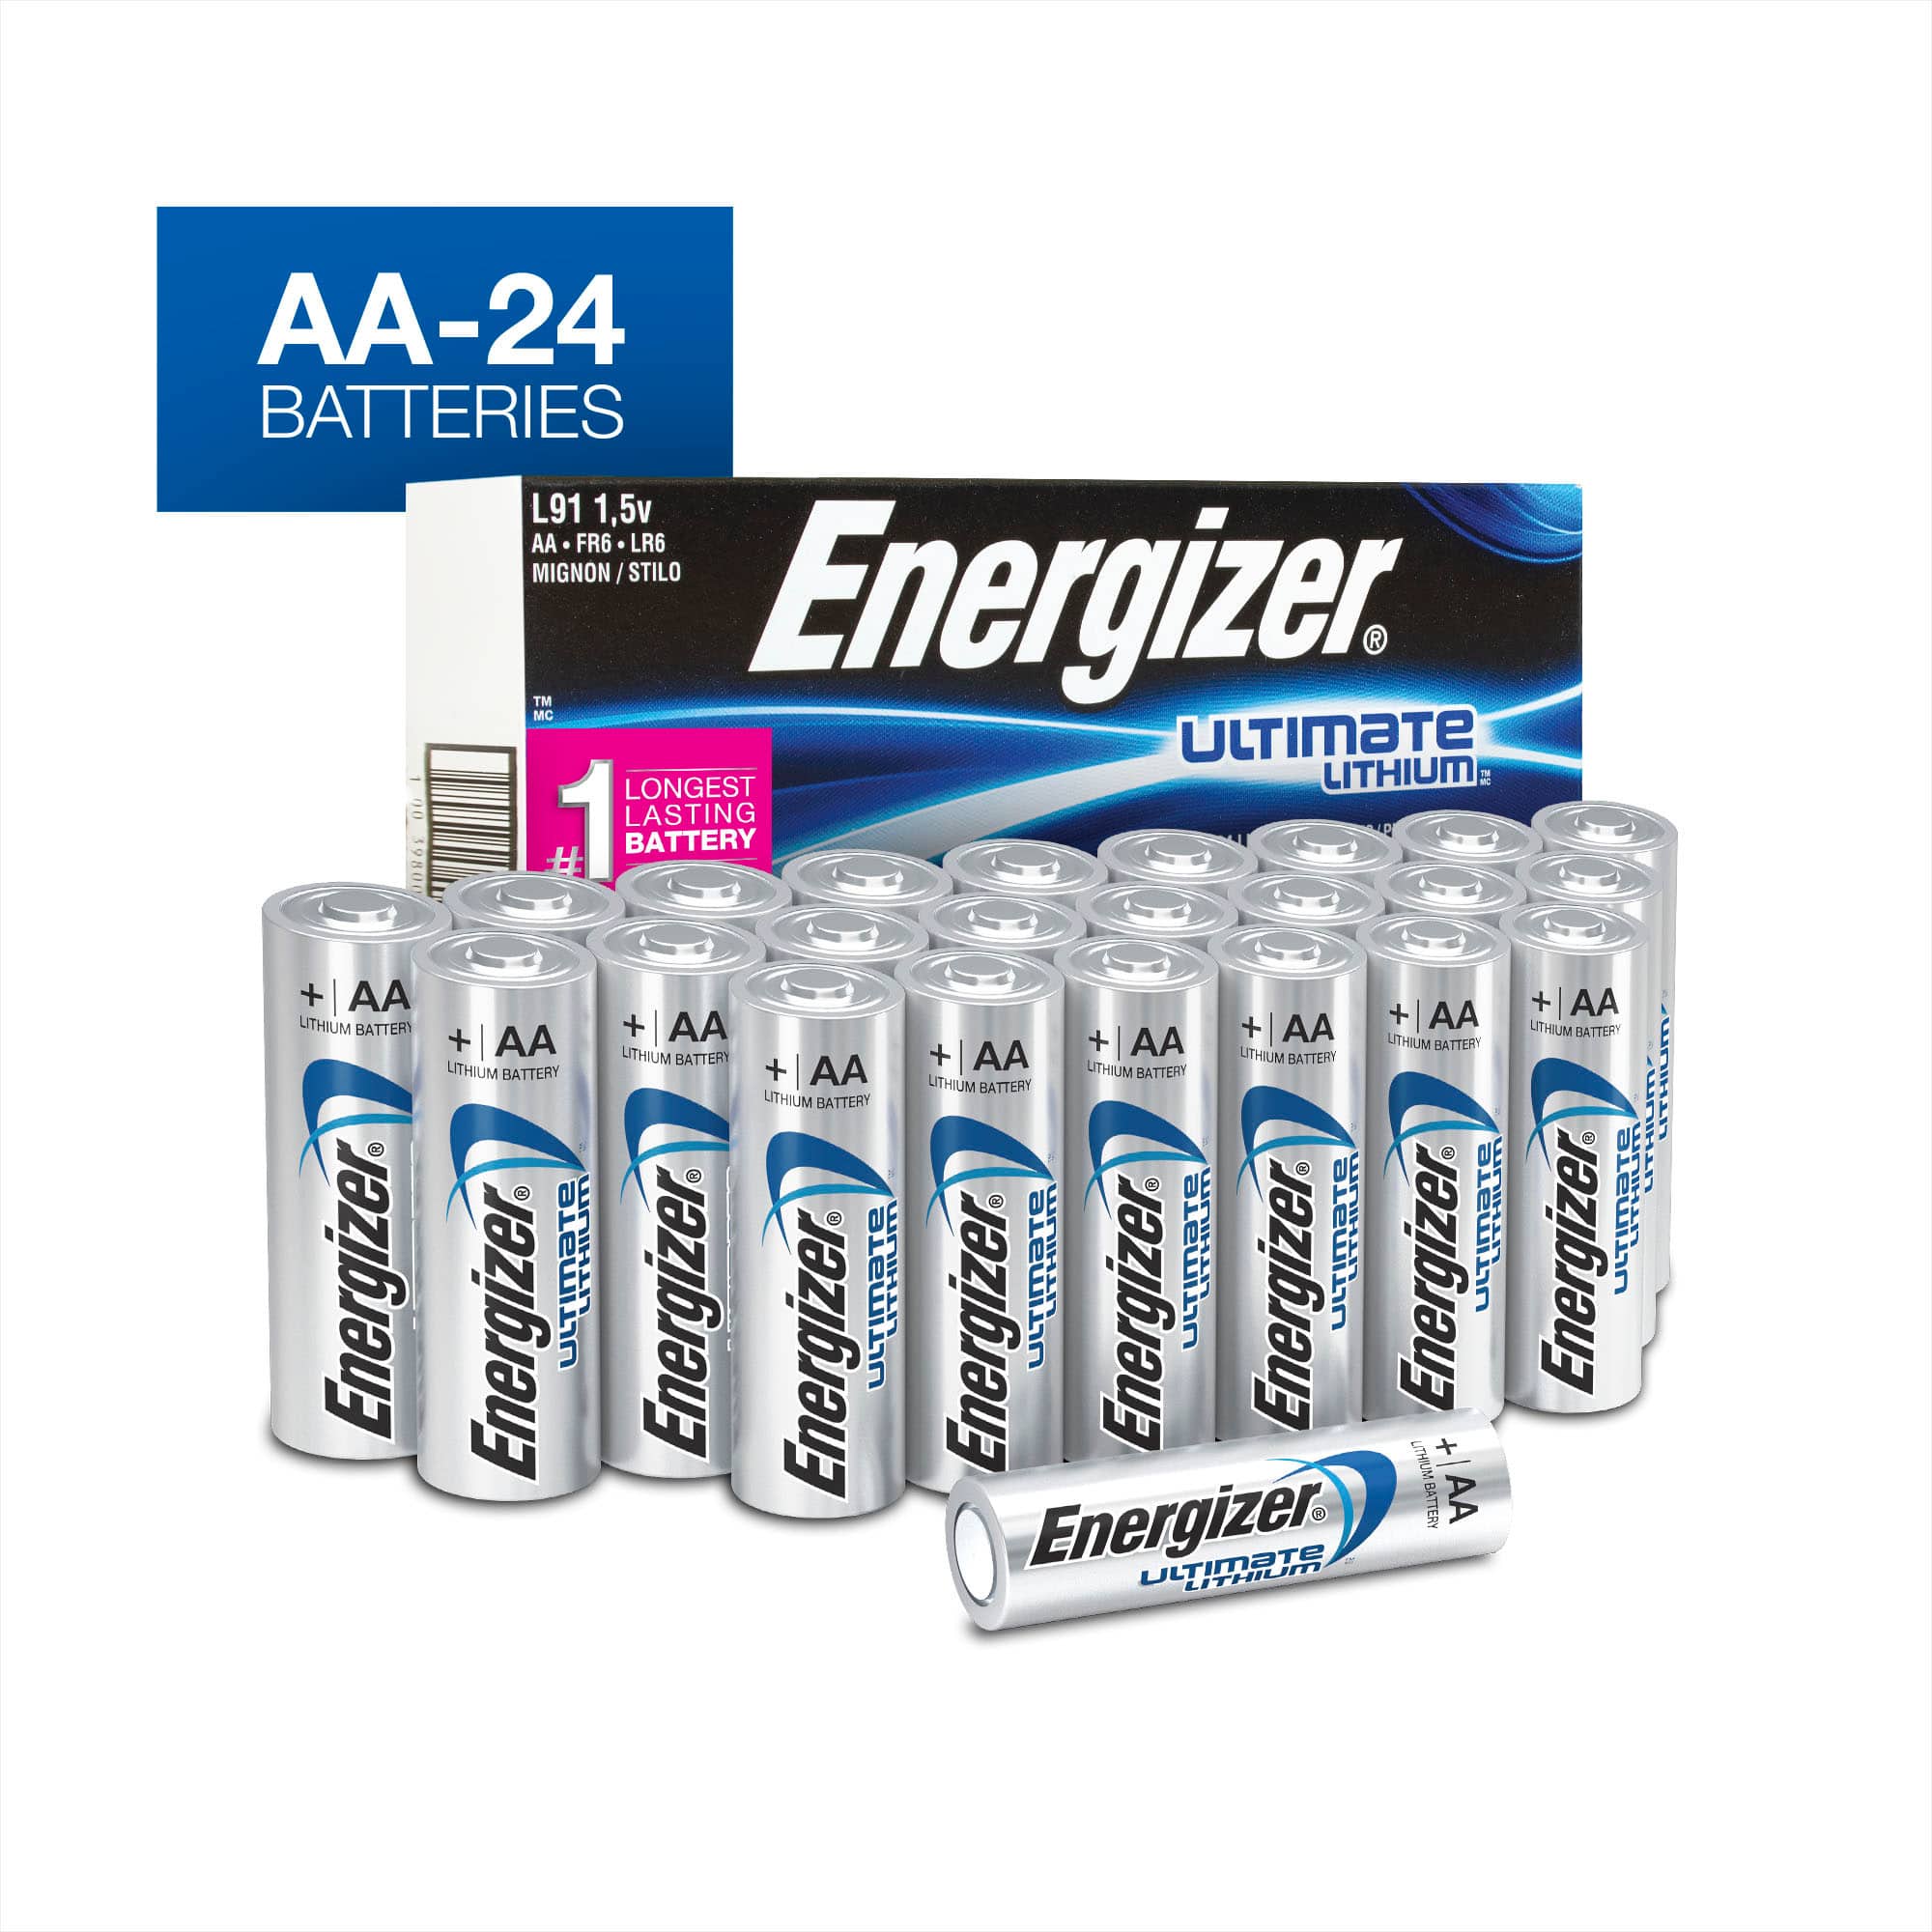 Energizer Ultimate Lithium AA Batteries, 24 Pack